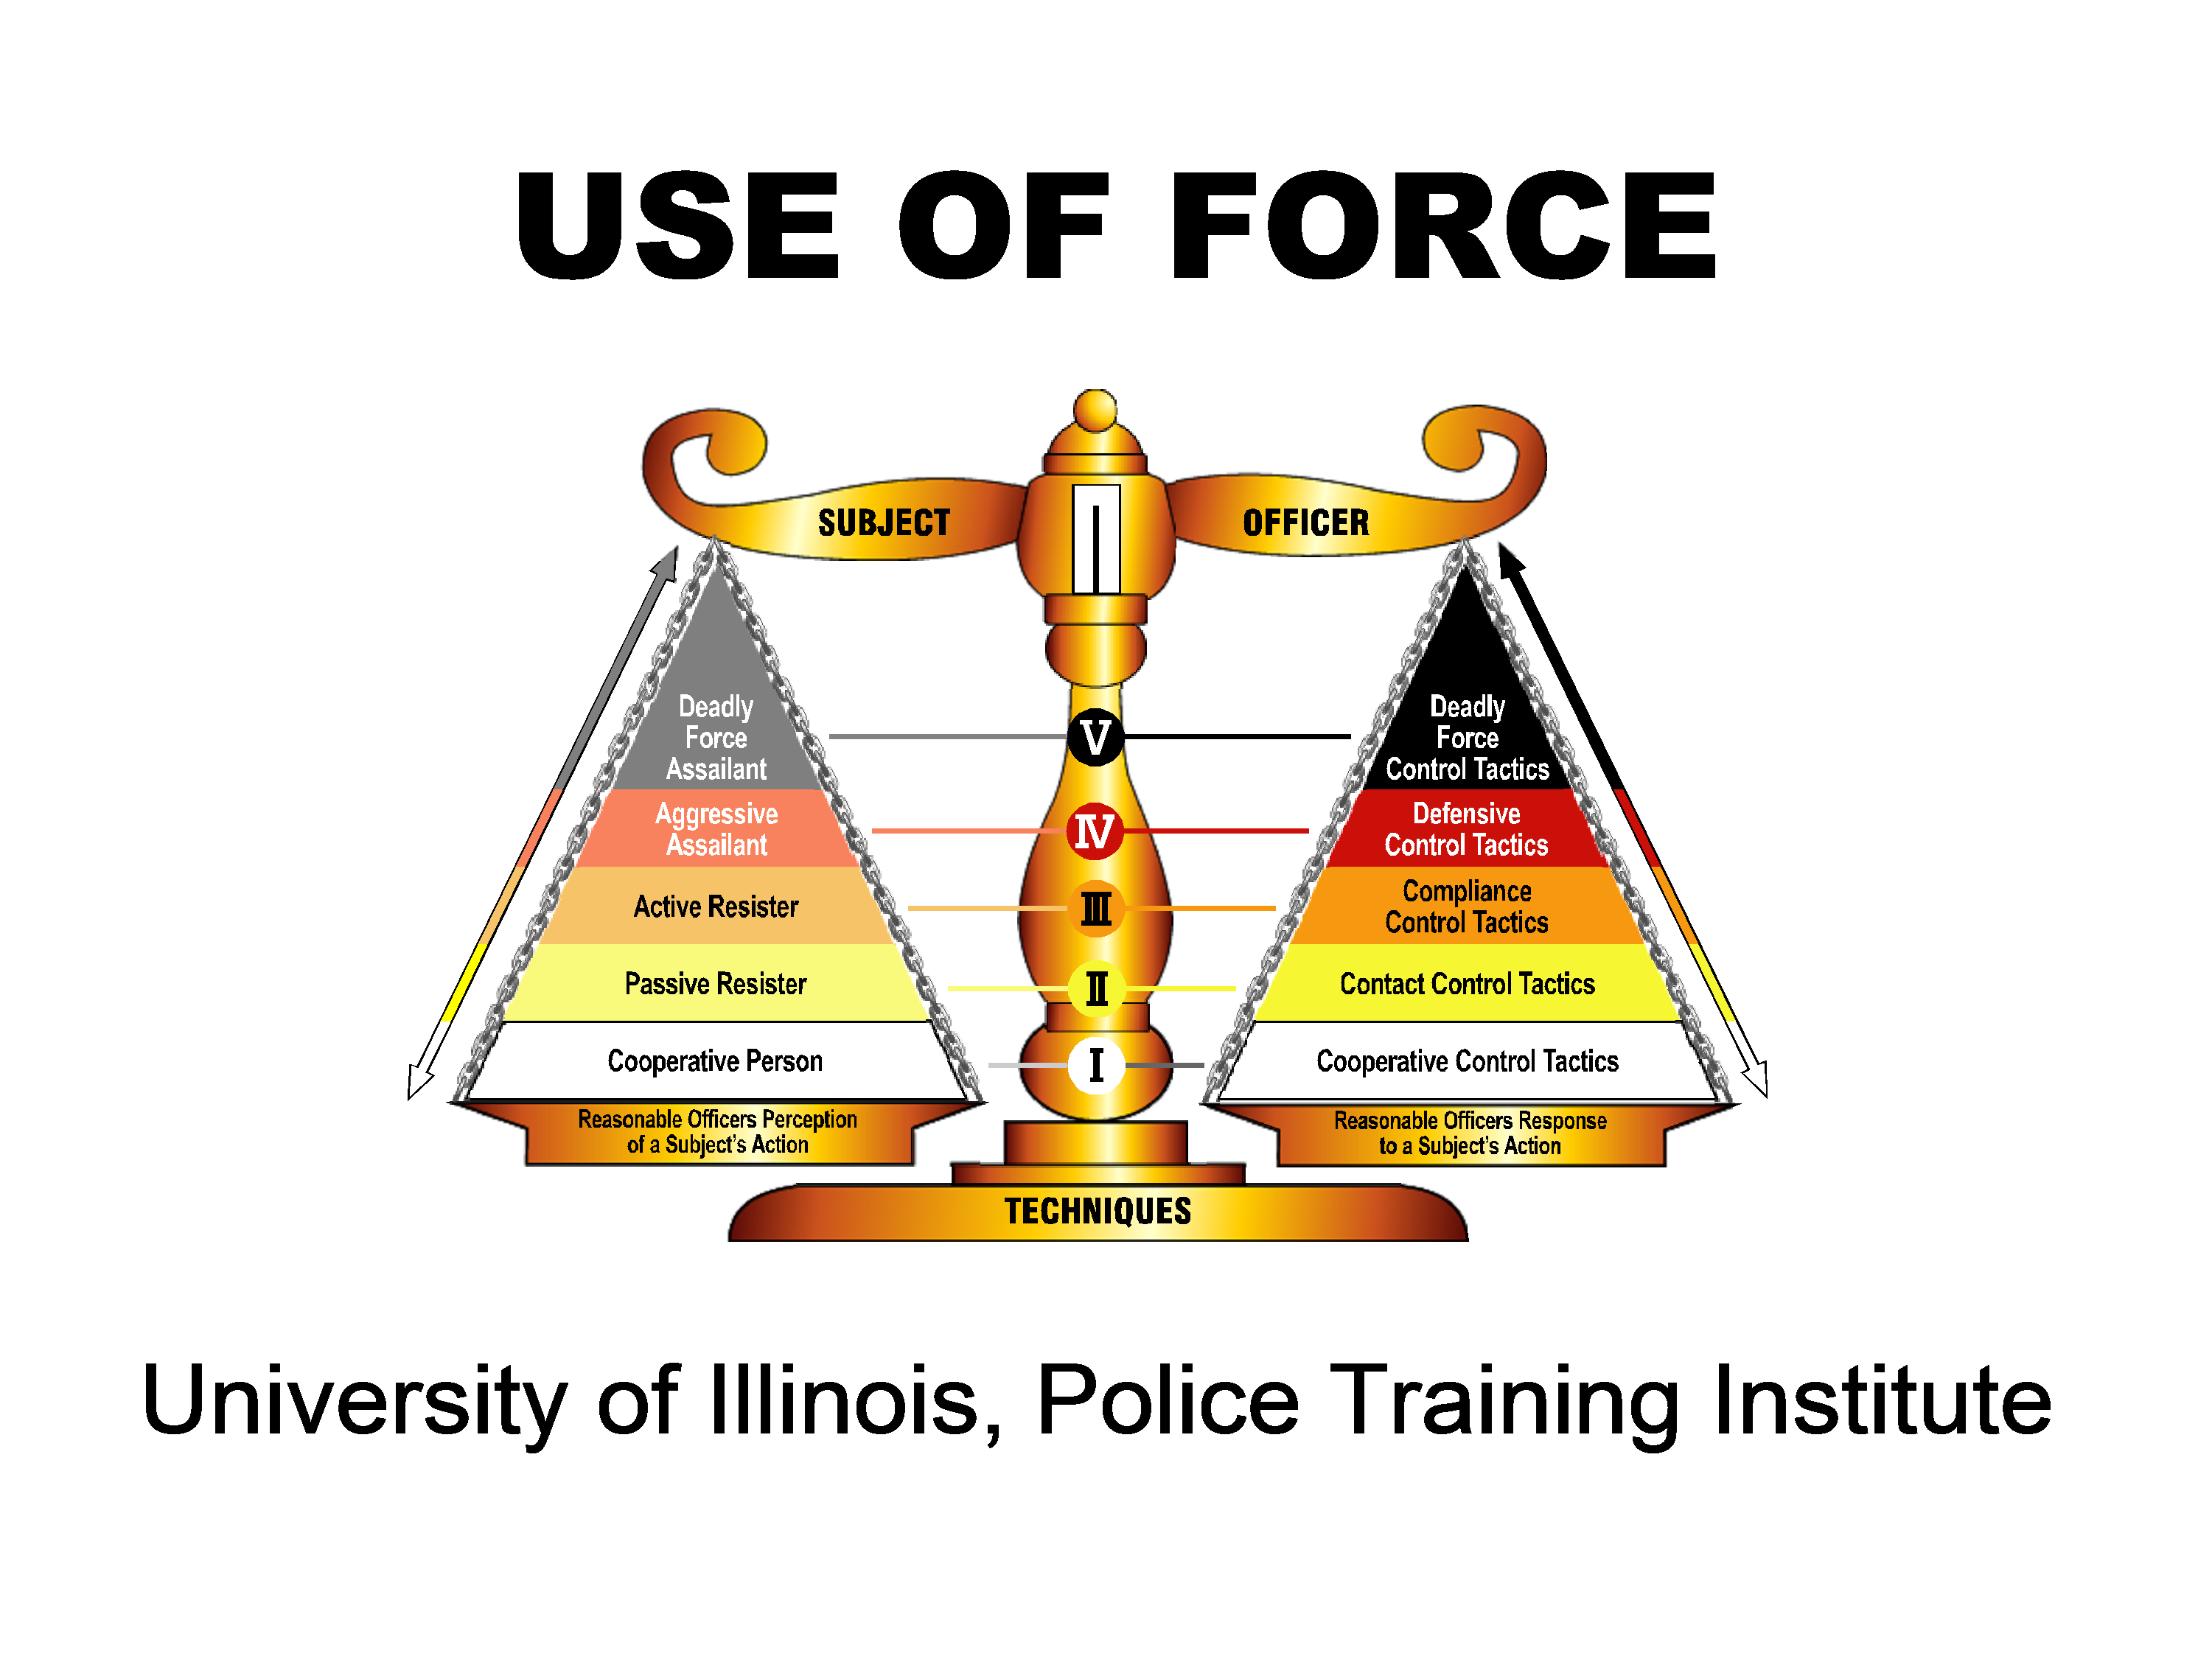 Use of Force Scale